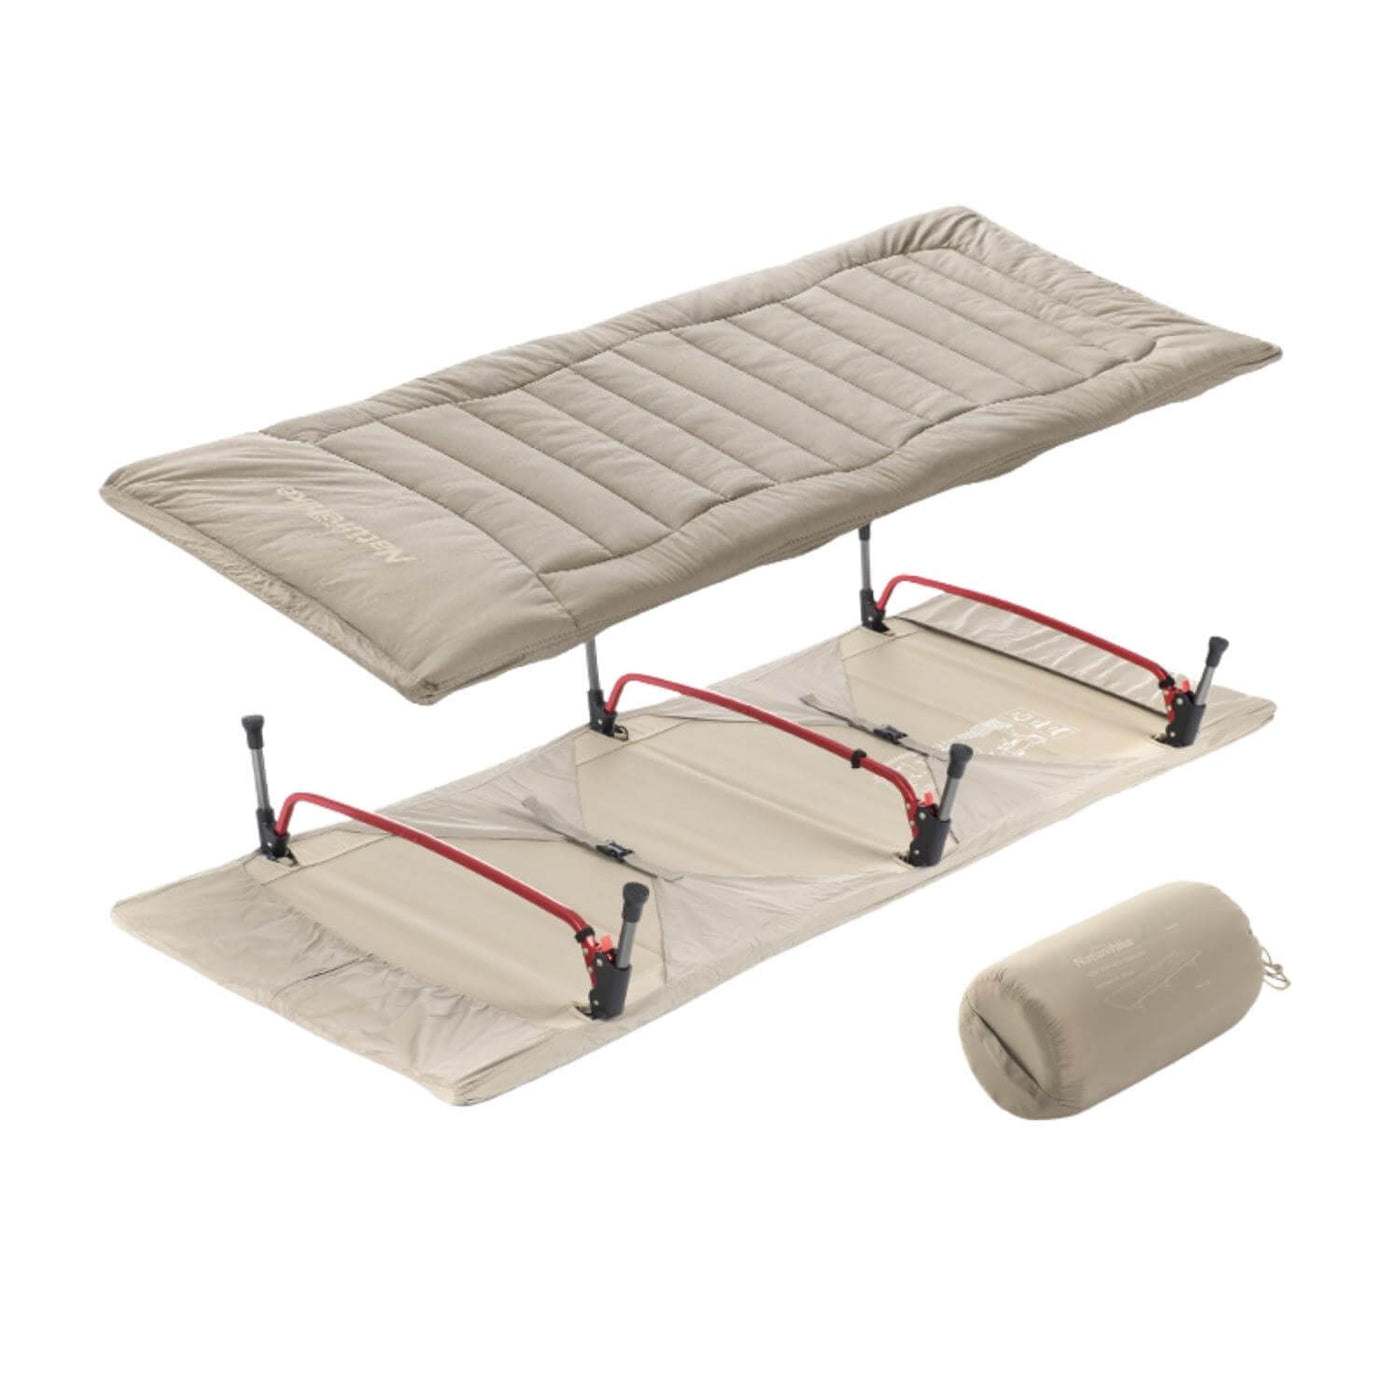 Cotton mattress for camping bed